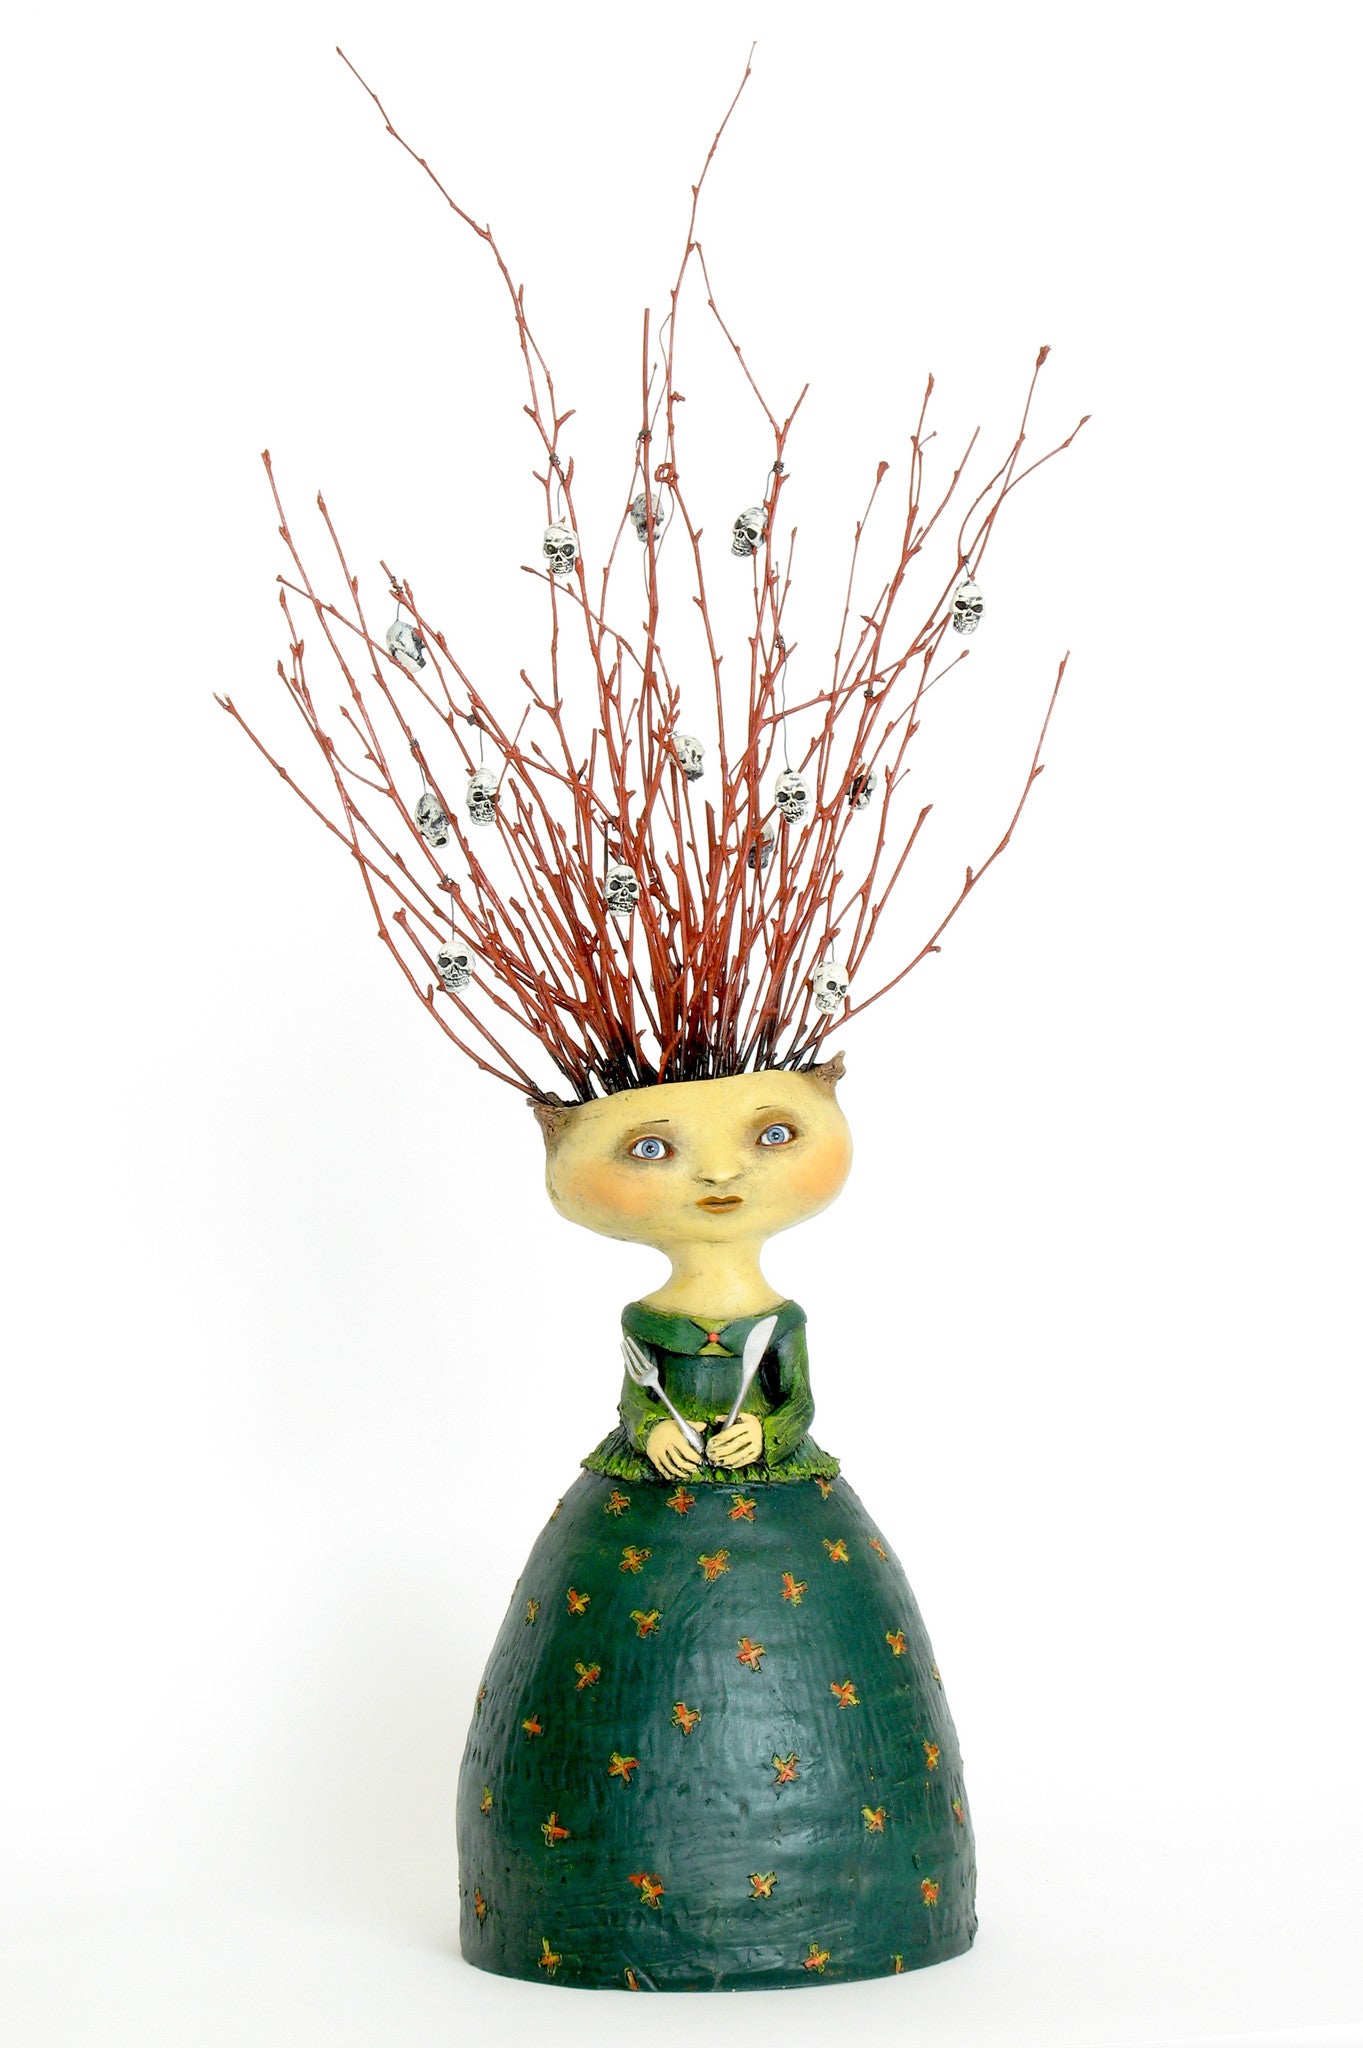 SOLD - Amy   "She Found that Some of Her Friends Were an Acquired Taste"  original ceramic sculpture by Jacquline Hurlbert